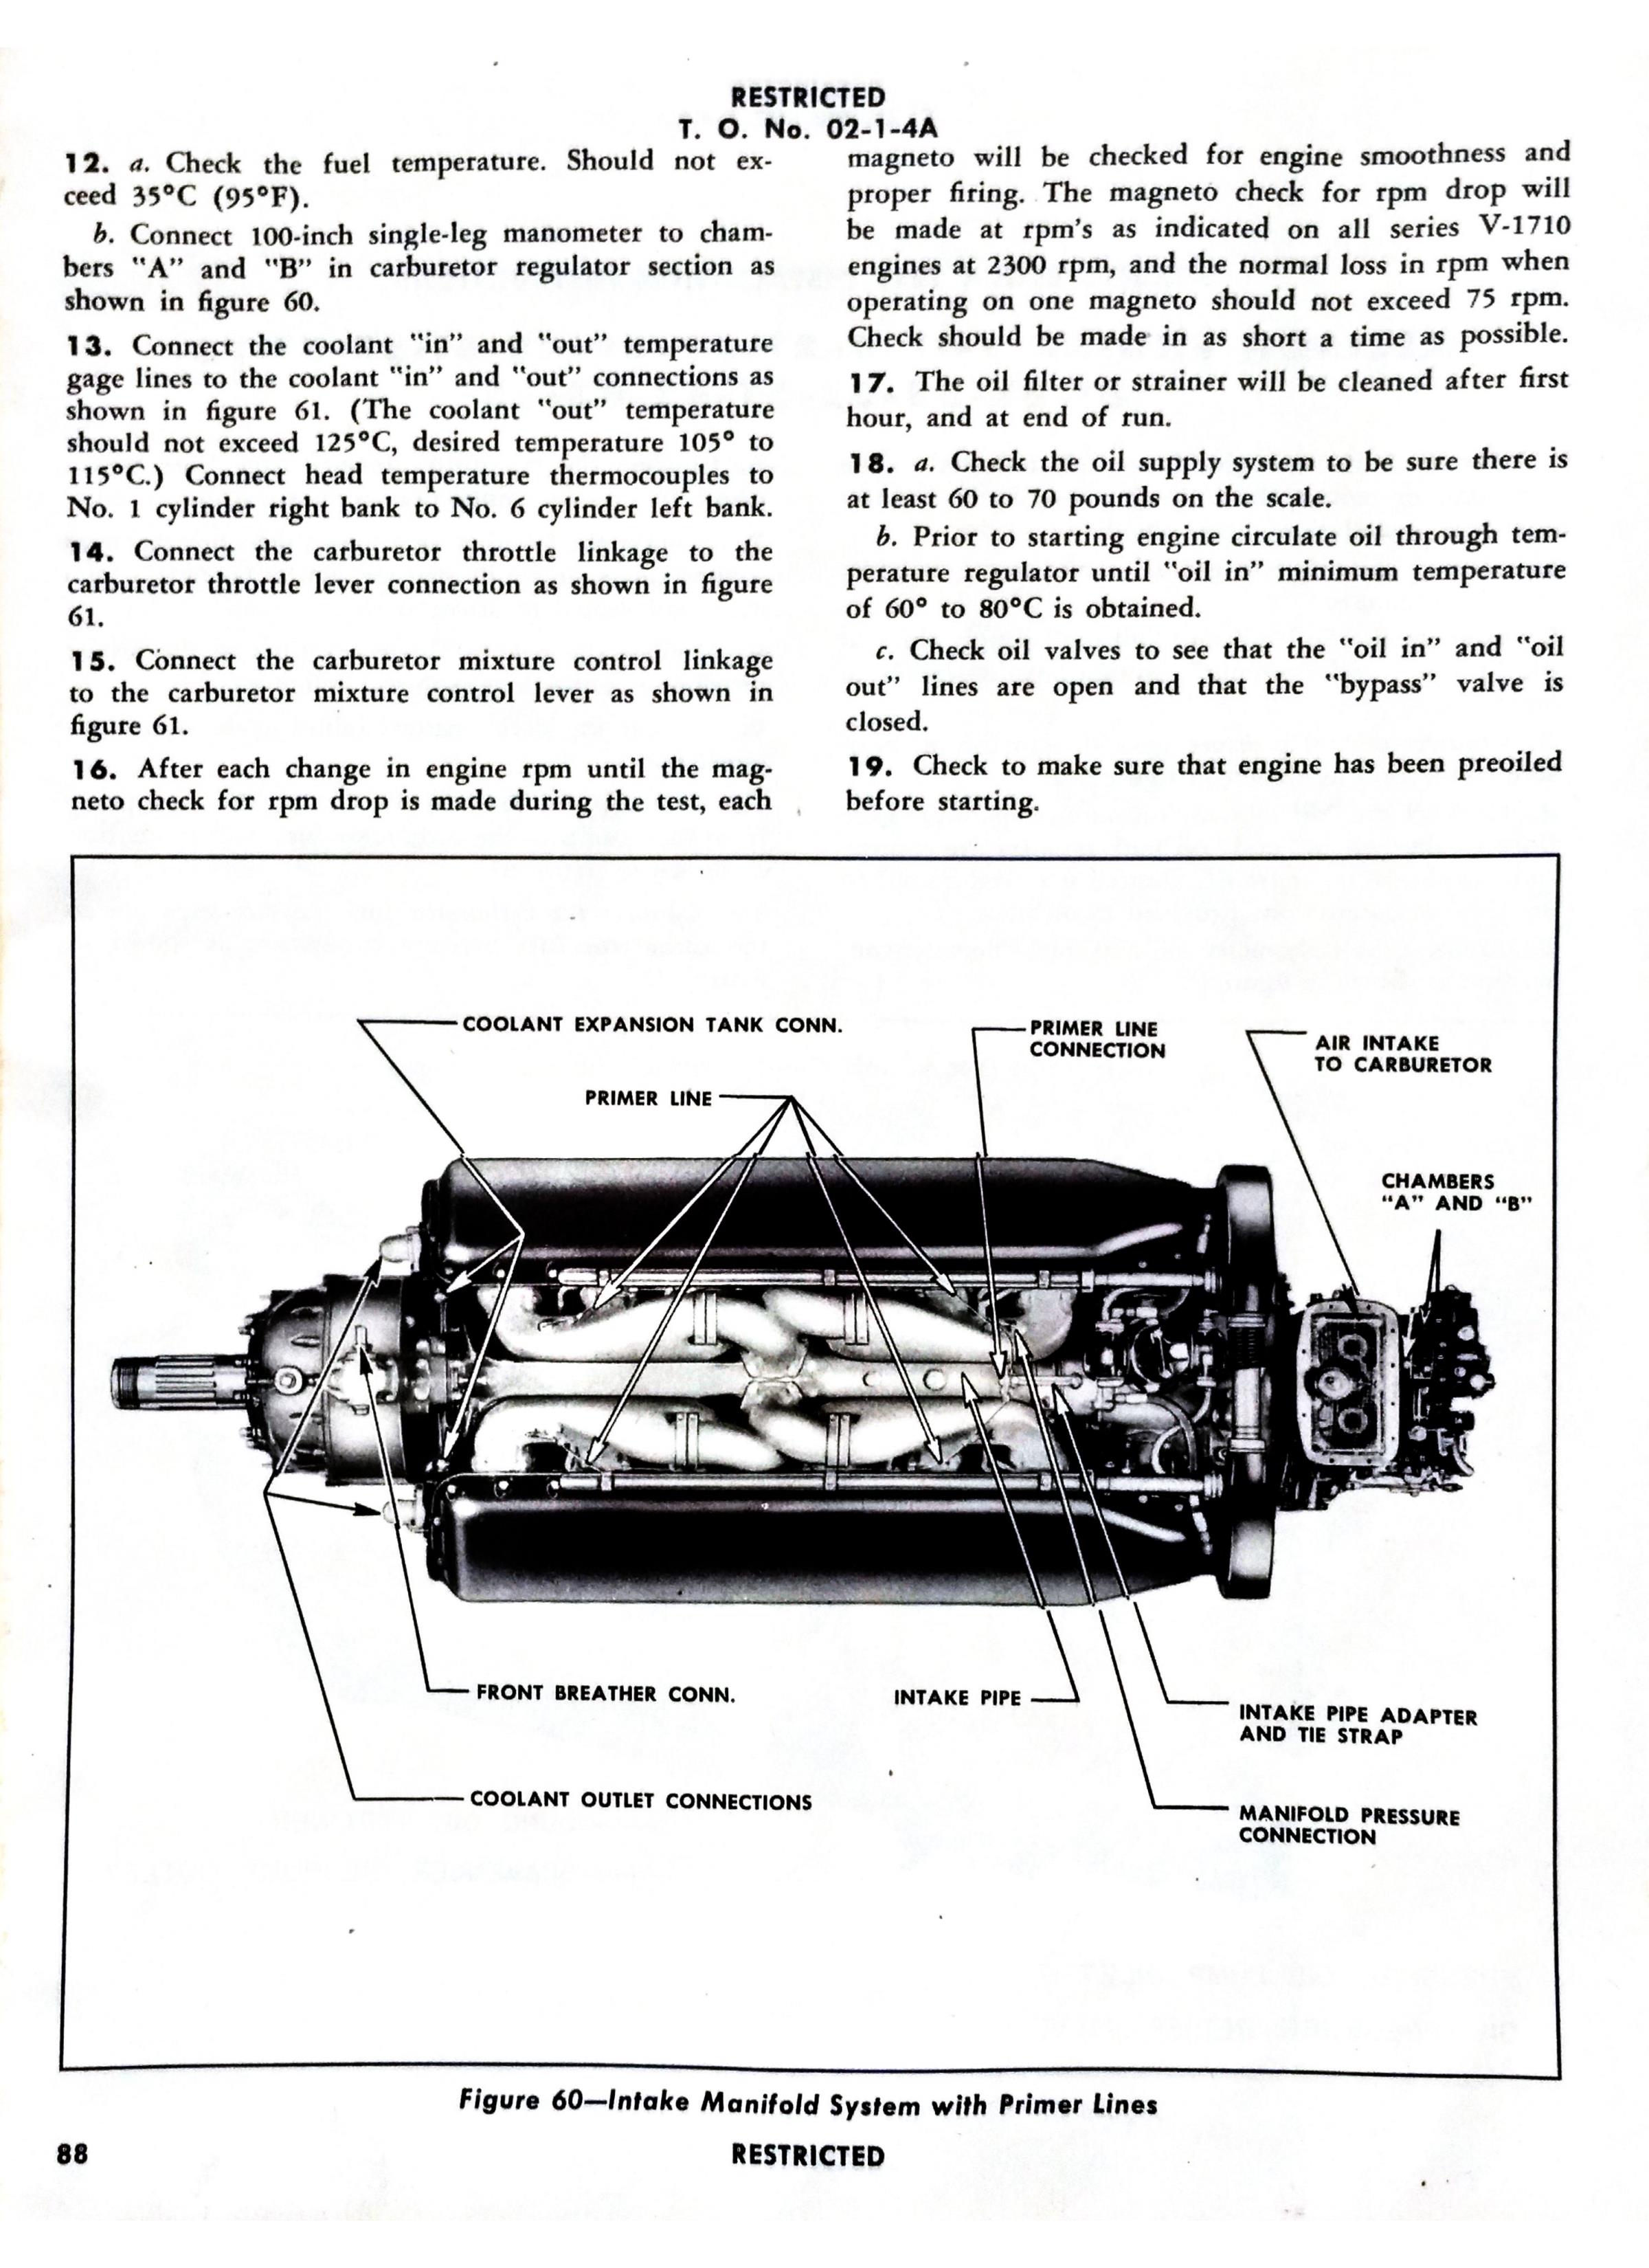 Sample page 2 from AirCorps Library document: Block Test Instructions for V-1710 Allison Engines